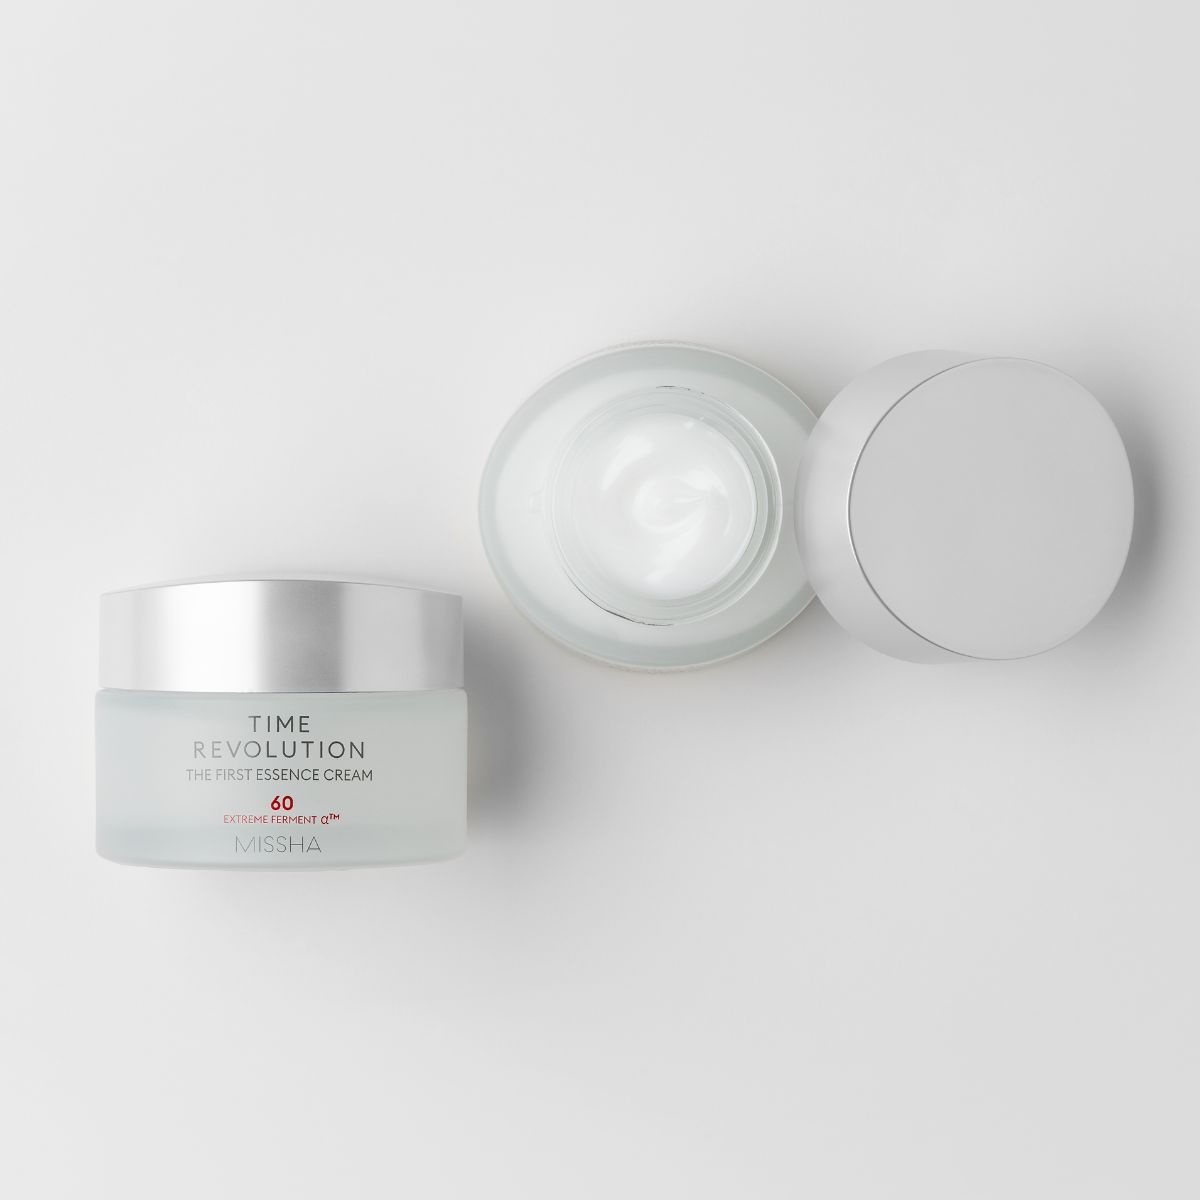 TIME REVOLUTION THE FIRST ESSENCE CREAM